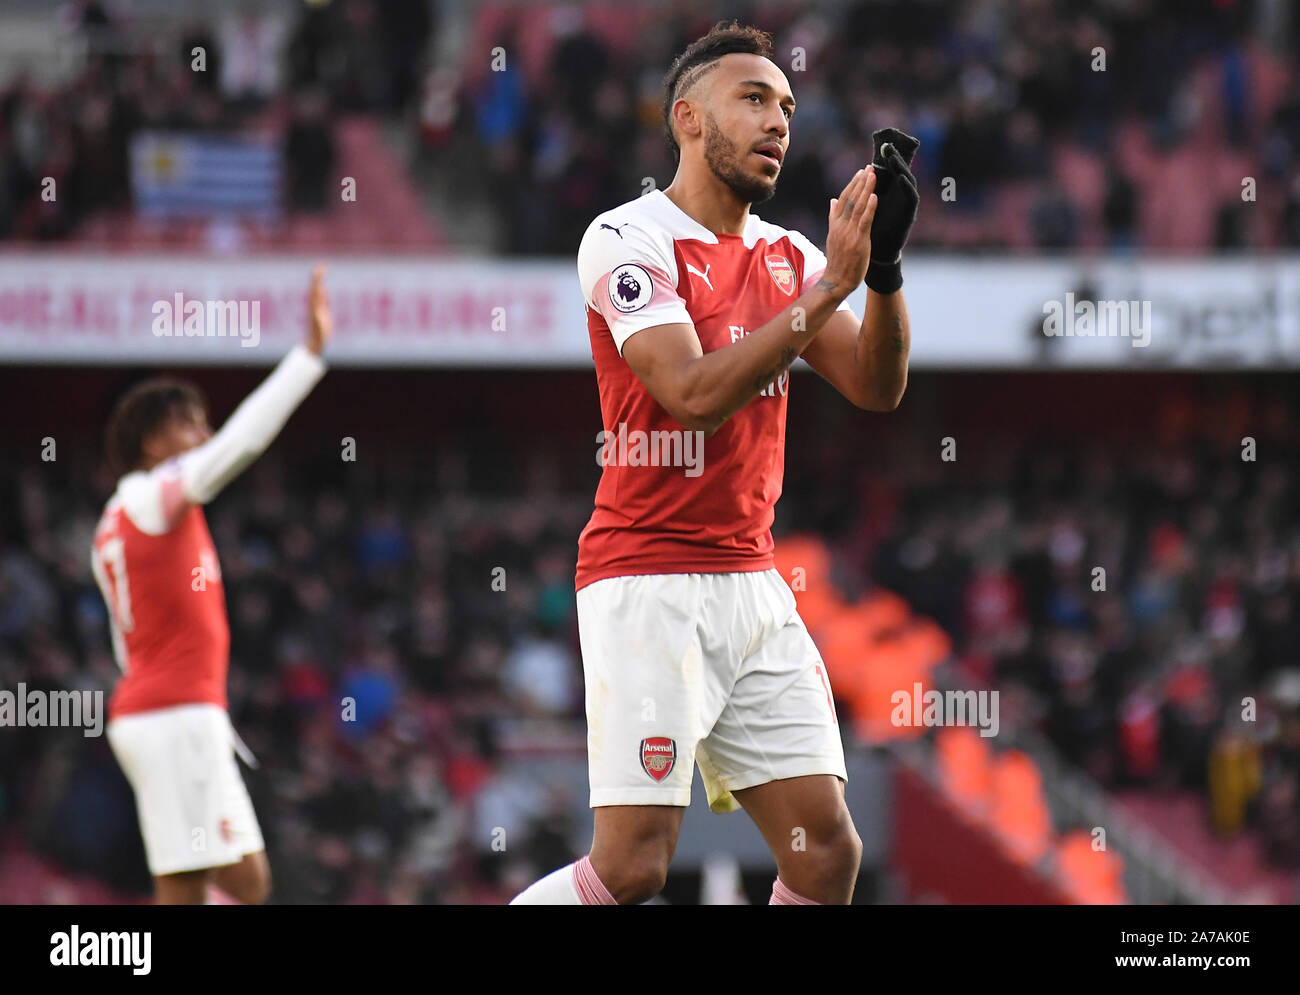 LONDON, ENGLAND - DECEMBER 22, 2018: Pierre-Emerick Aubameyang of Arsenal salutes the fans after the 2018/19 Premier League game between Arsenal FC and Burnley FC at Emirates Stadium. Stock Photo